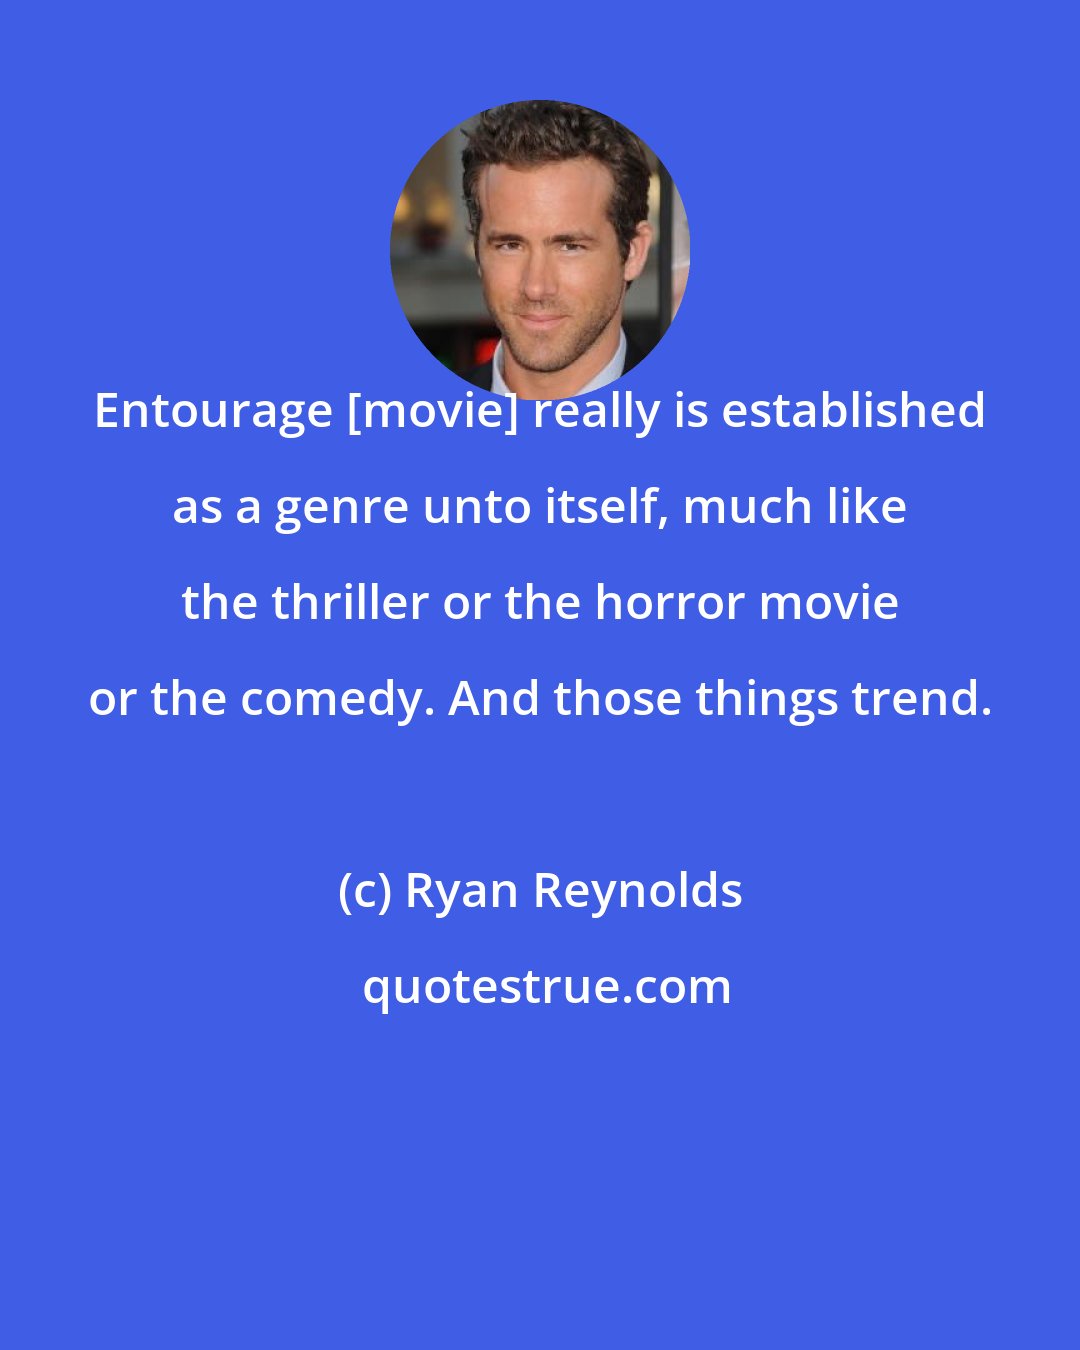 Ryan Reynolds: Entourage [movie] really is established as a genre unto itself, much like the thriller or the horror movie or the comedy. And those things trend.